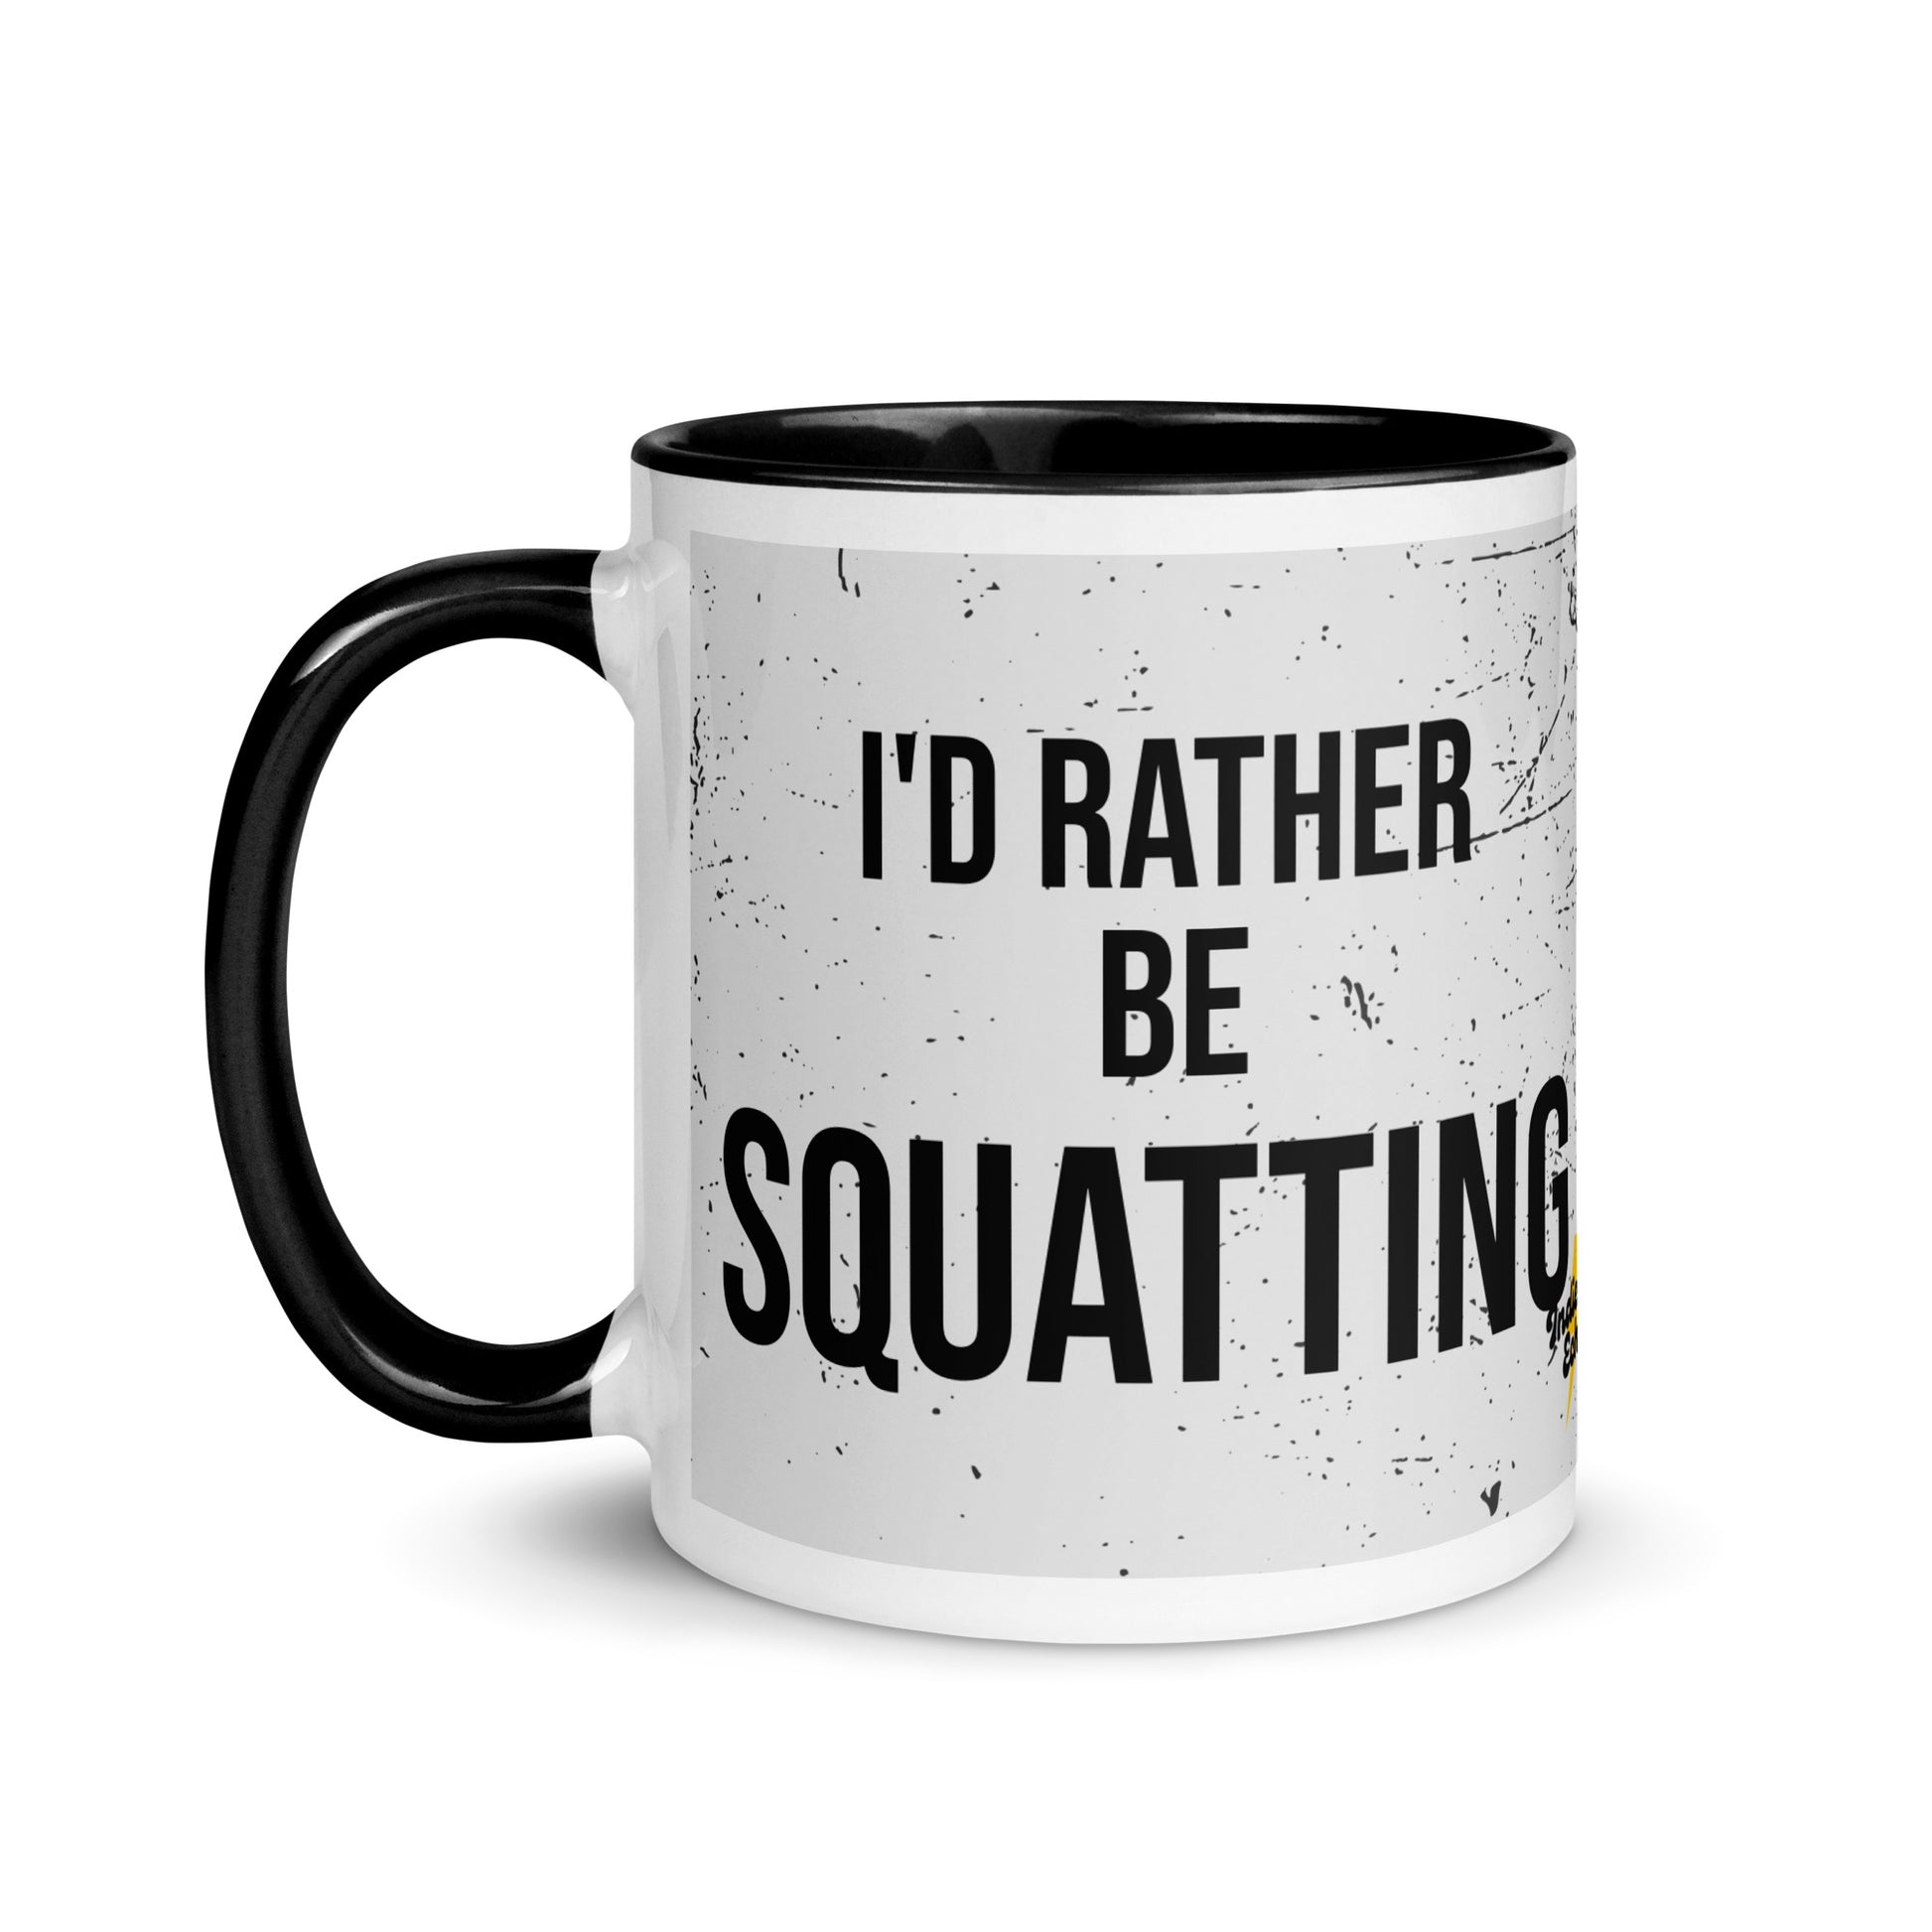 Black handled mug with I'd rather be squatting written on it, across a grey splatter background. A gift for someone who loves the gym.